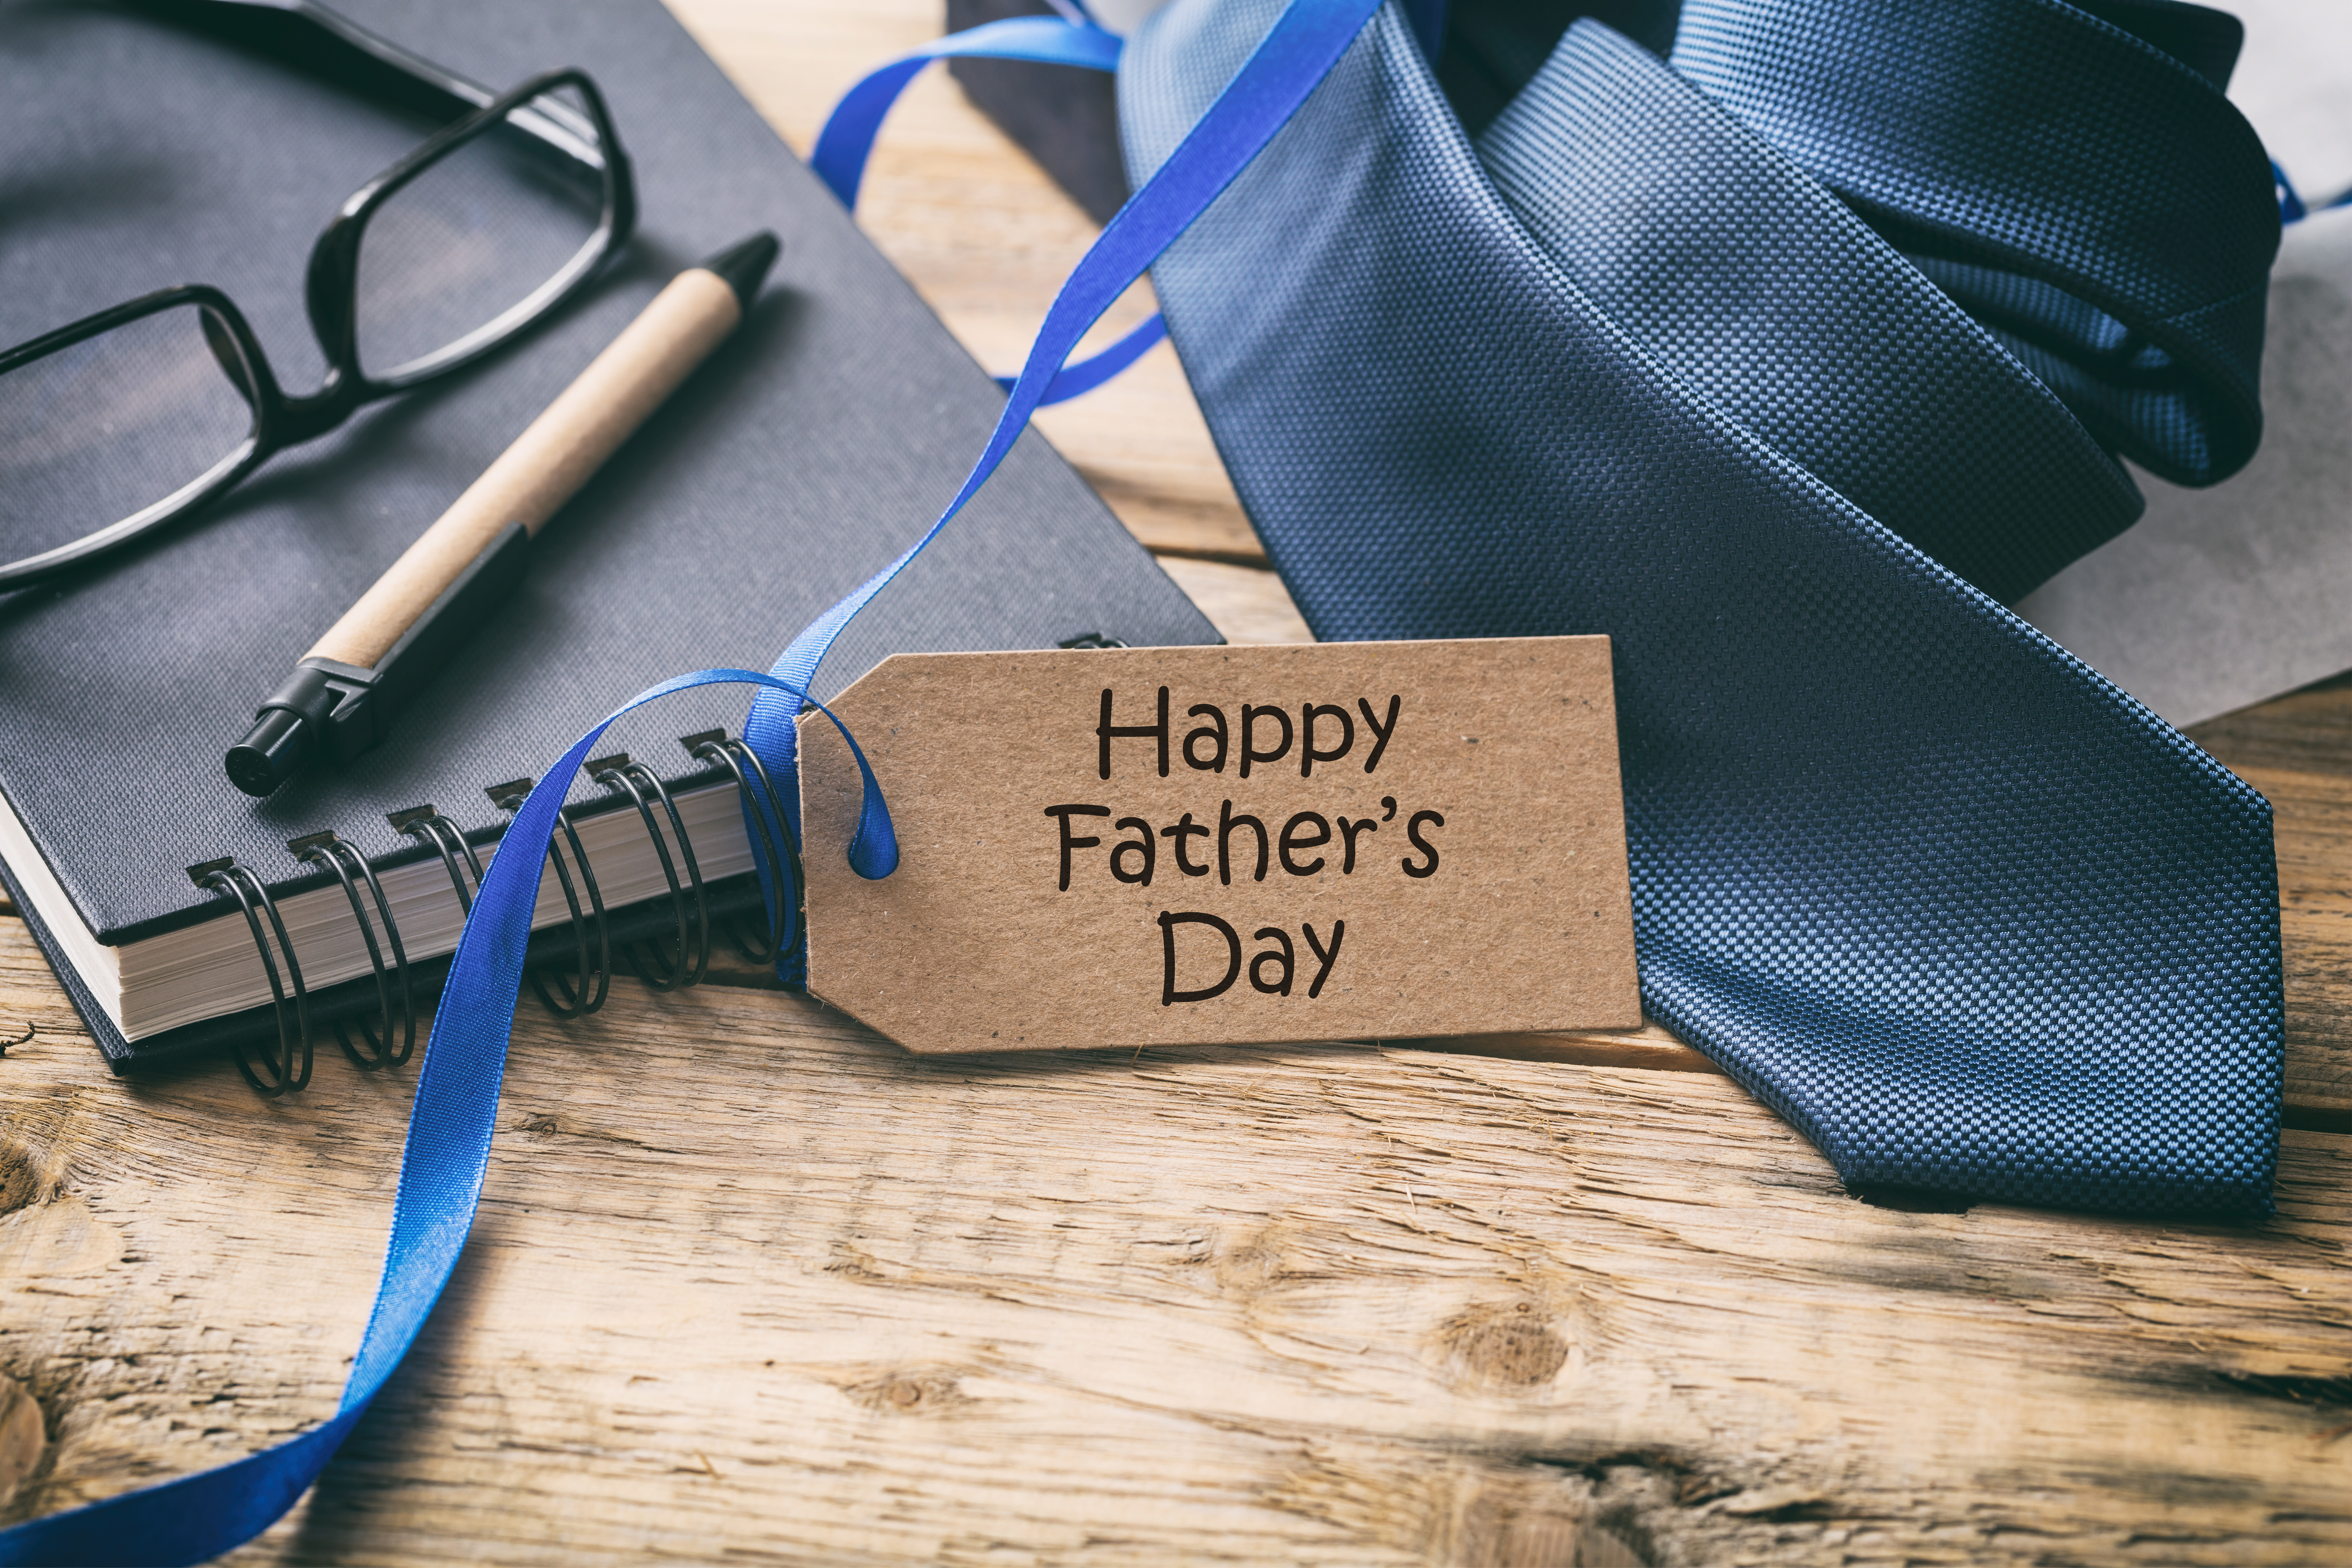 https://www.spectrio.com/wp-content/uploads/2014/06/happy-father-s-day-blue-tie-and-tag-office-desk-2021-08-26-16-34-06-utc.jpg